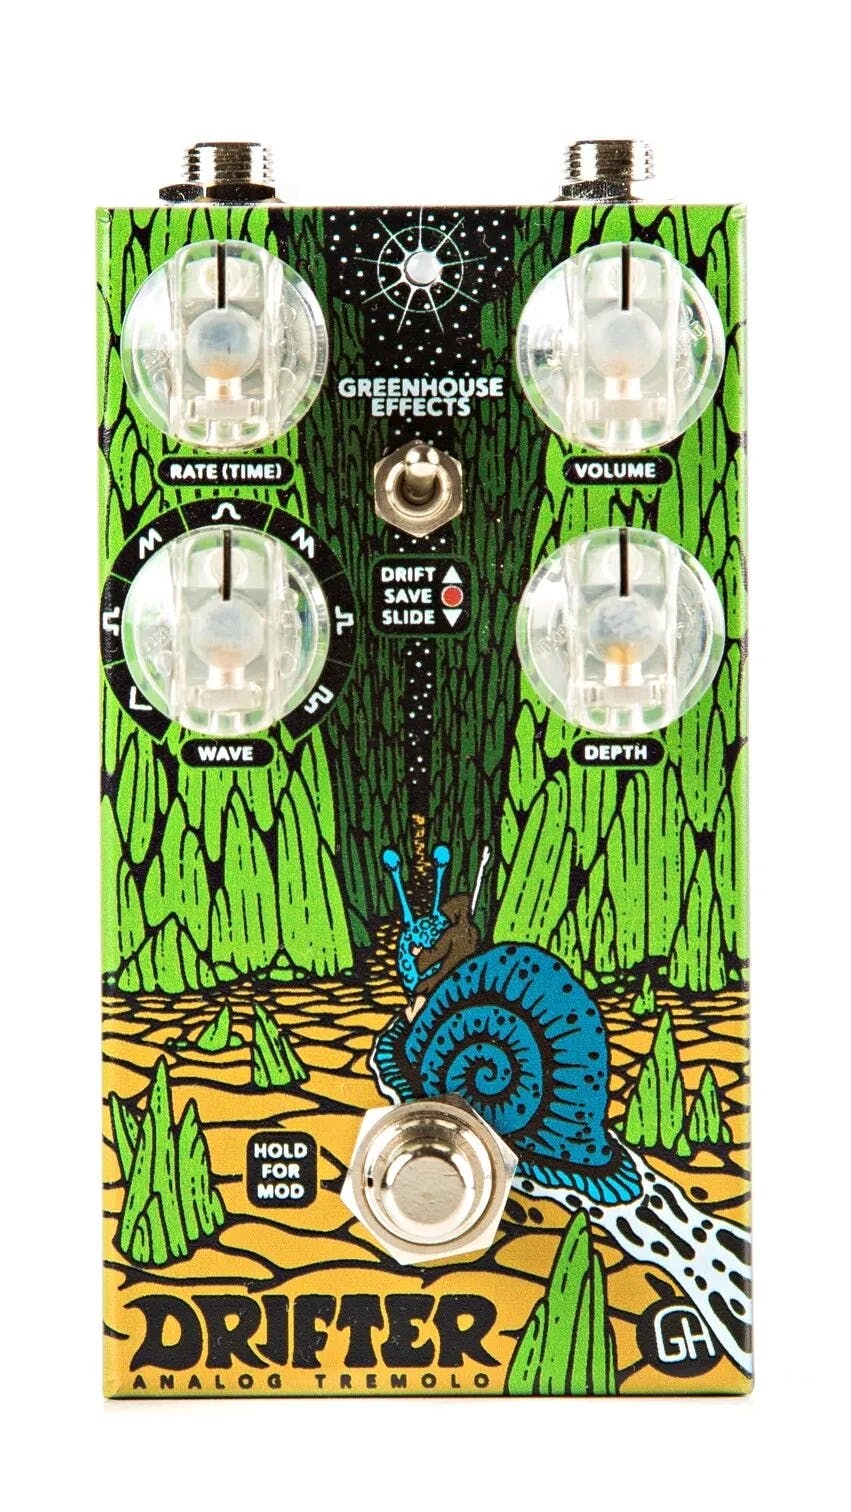 Drifter Analog Tremolo Guitar Pedal By Greenhouse Effects